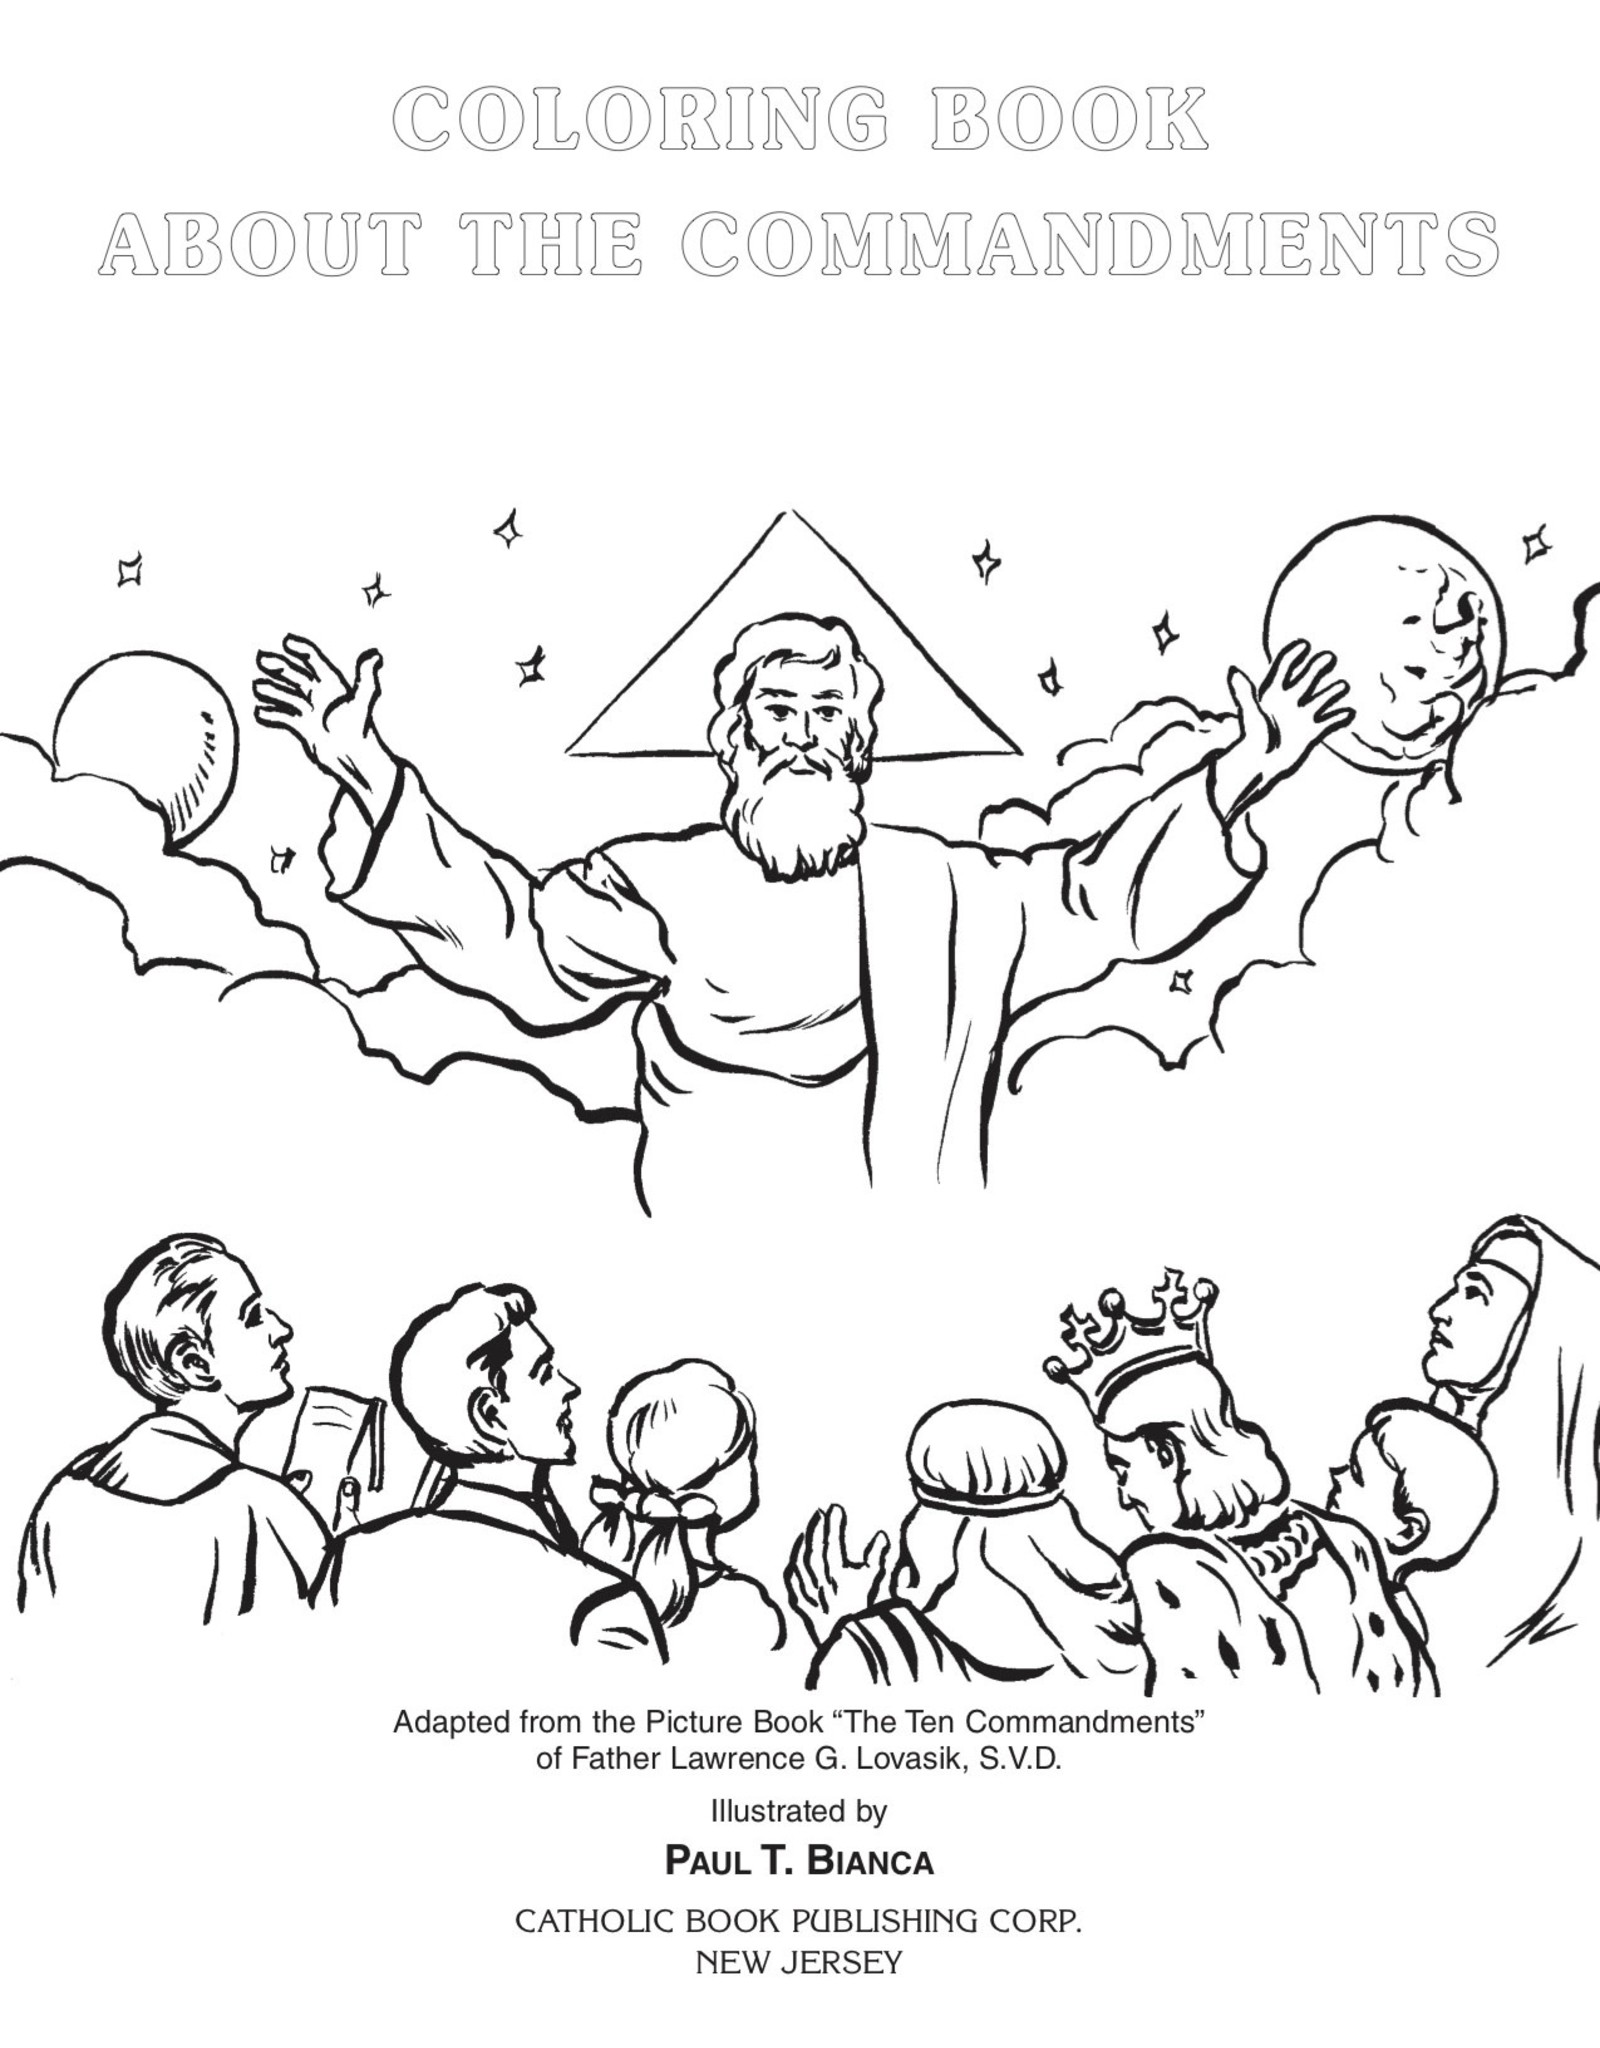 Catholic Book Publishing Coloring Book About the Commandments, by Rev. Lawrence Lovasik and illustrated by Paul T. Bianca